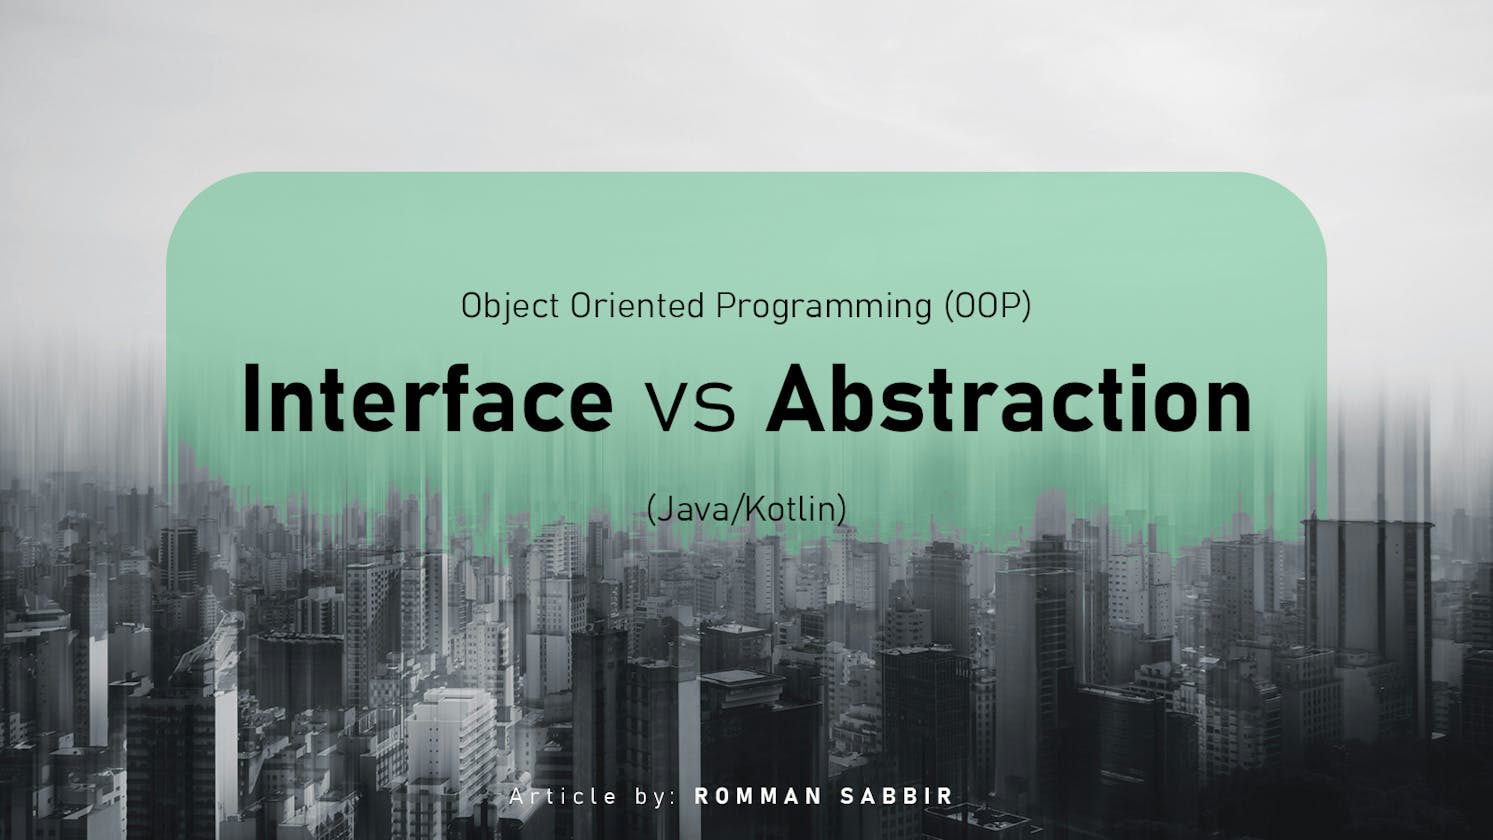 Object Oriented Programming (OOP) - Interface vs Abstraction (Java/Kotlin)